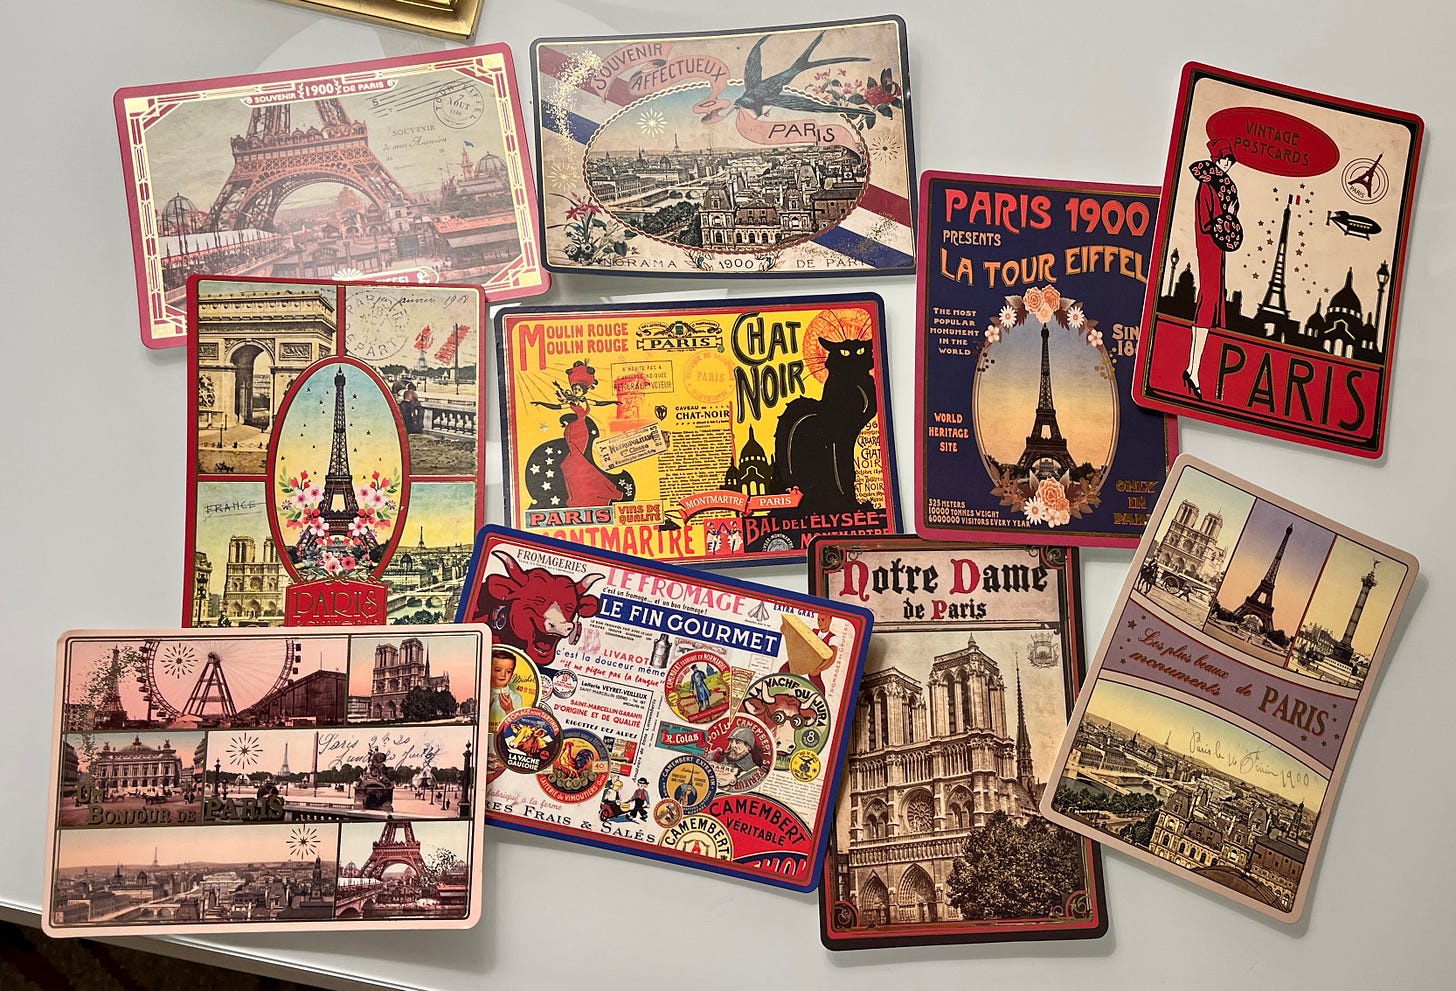 Postcards from Paris for Evelyn Skye's newsletter subscribers